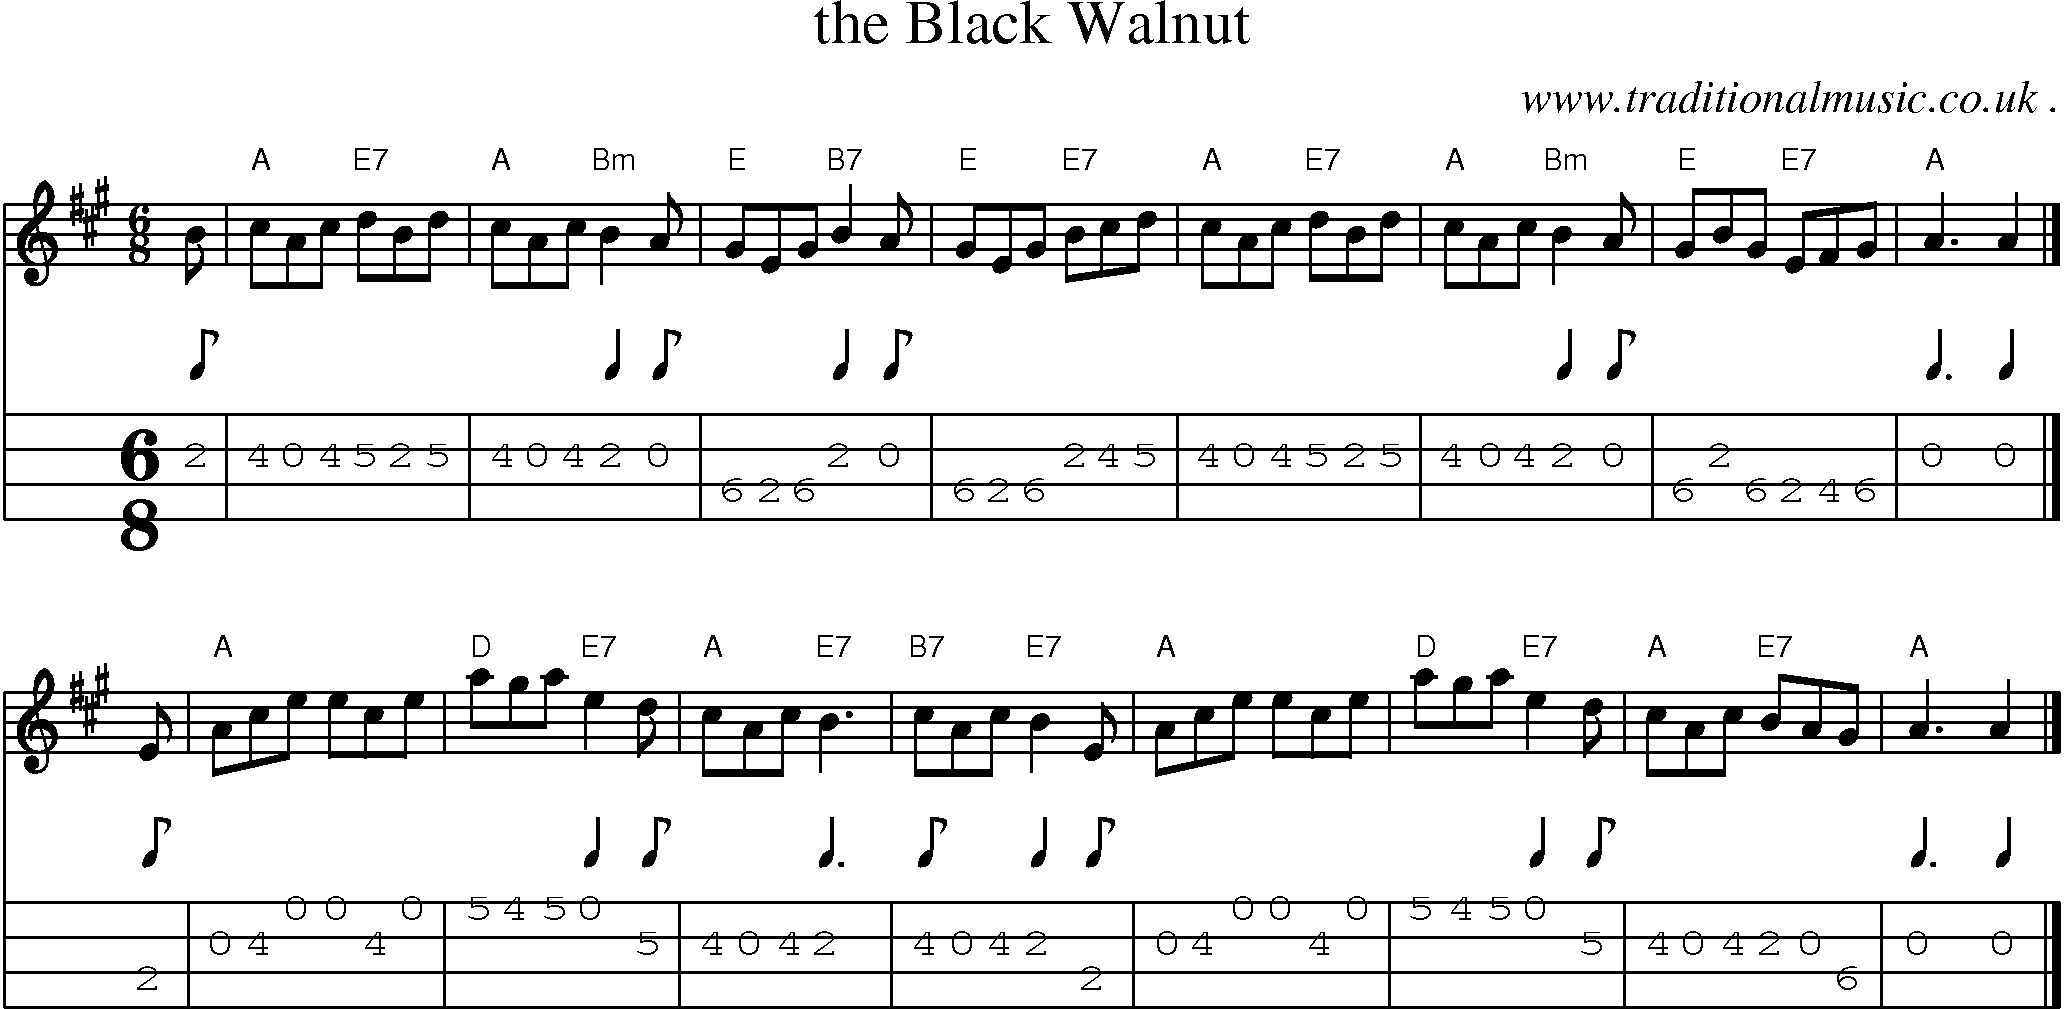 Sheet-music  score, Chords and Mandolin Tabs for The Black Walnut